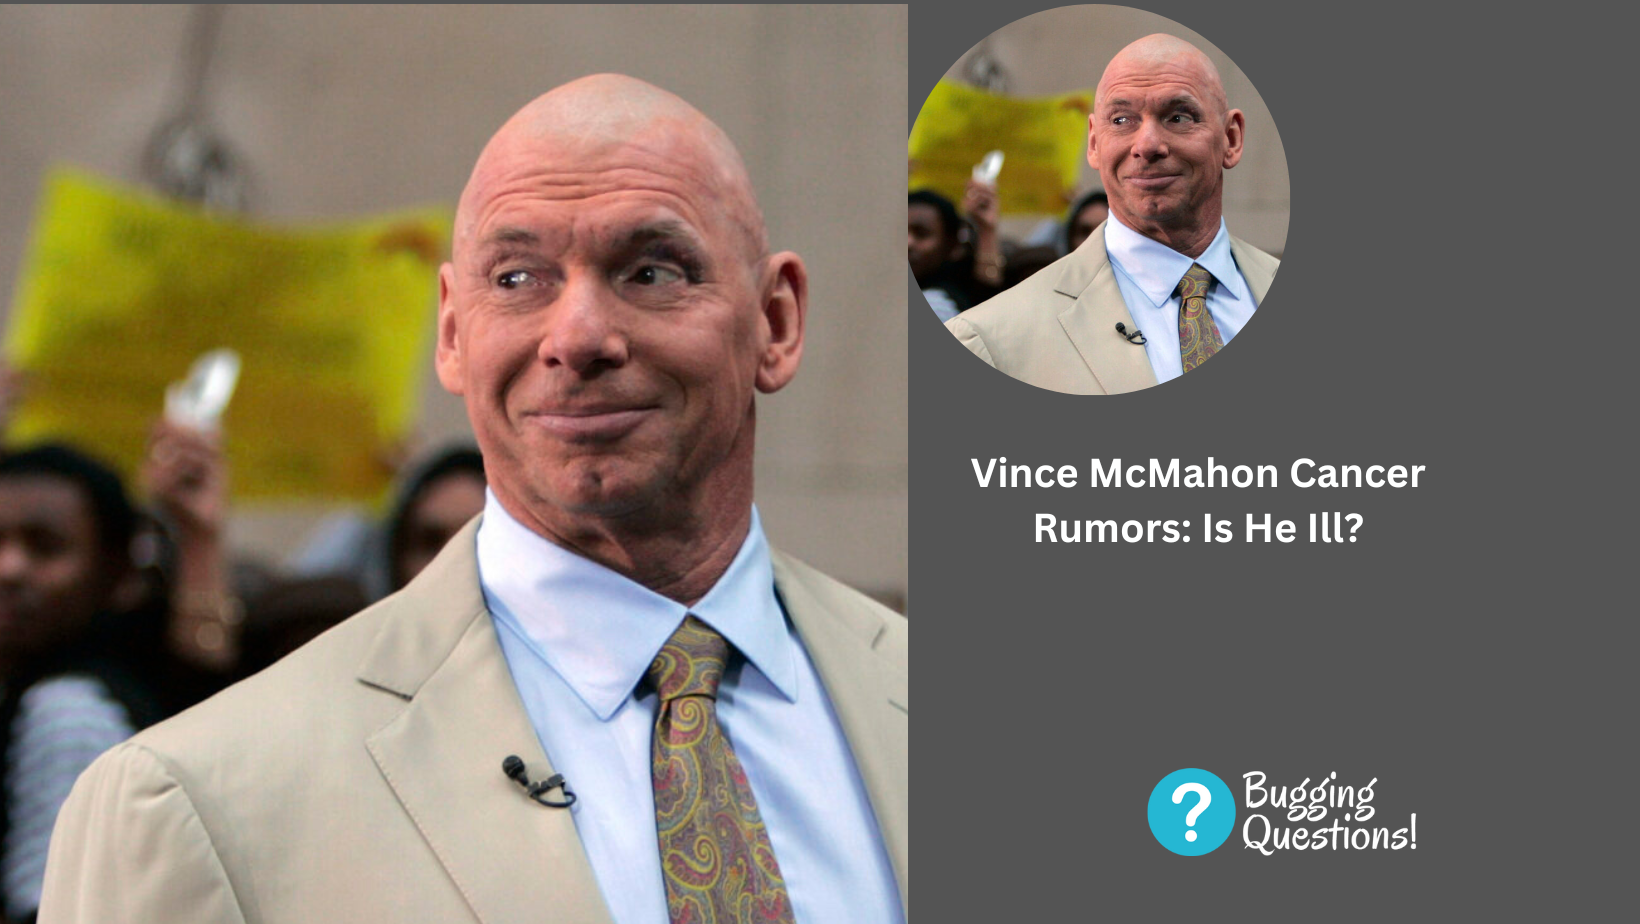 Vince McMahon Cancer Rumors: Is He Ill?